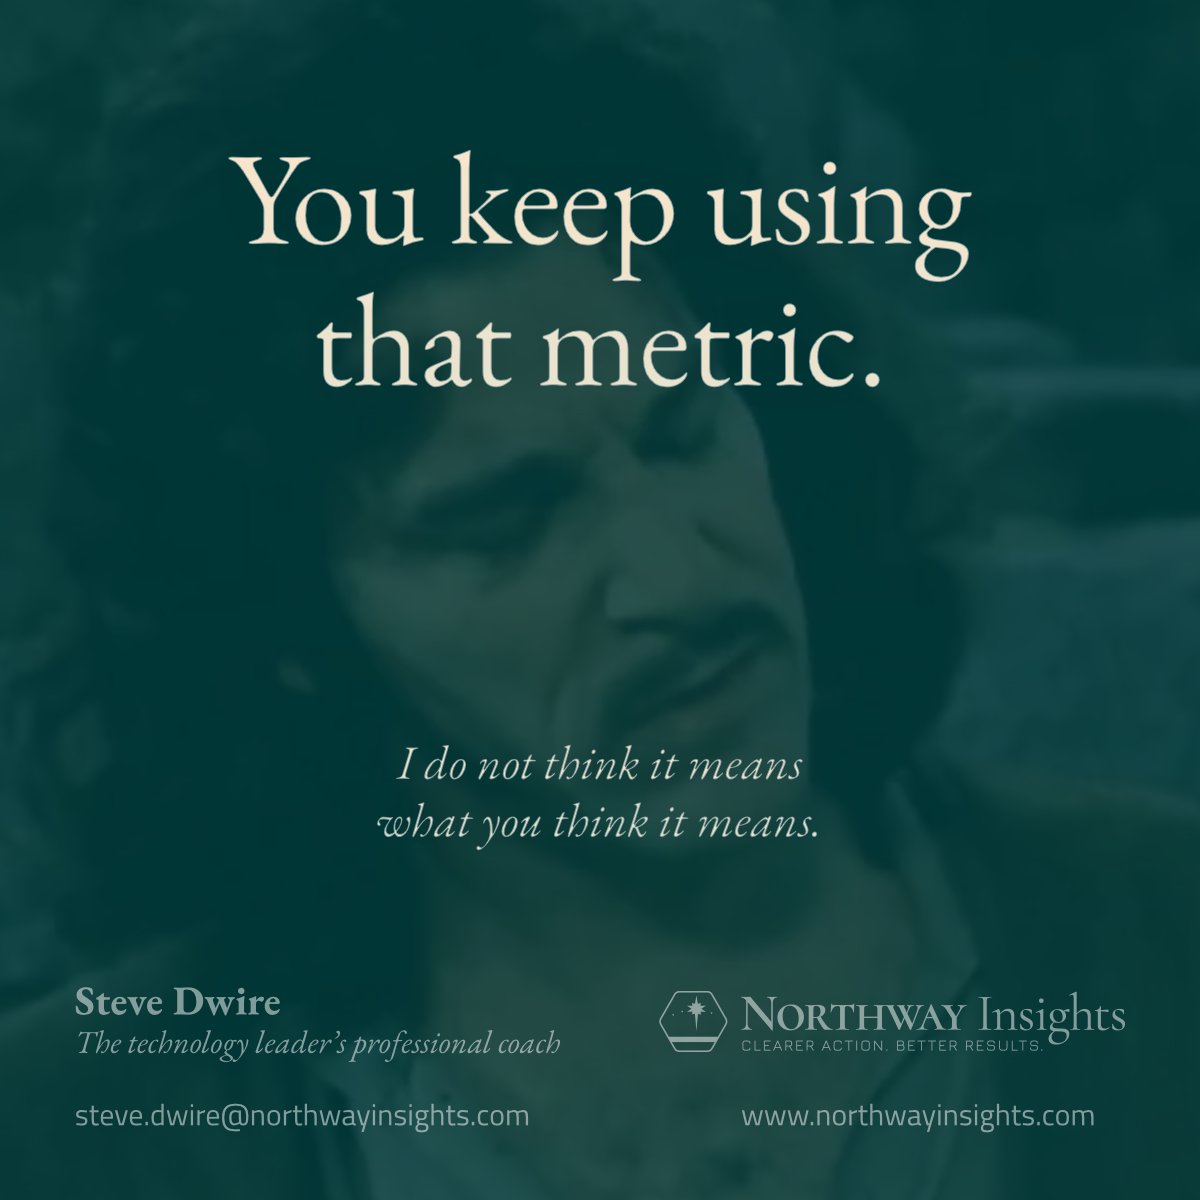 You keep using that metric. (I do not think it means what you think it means.)